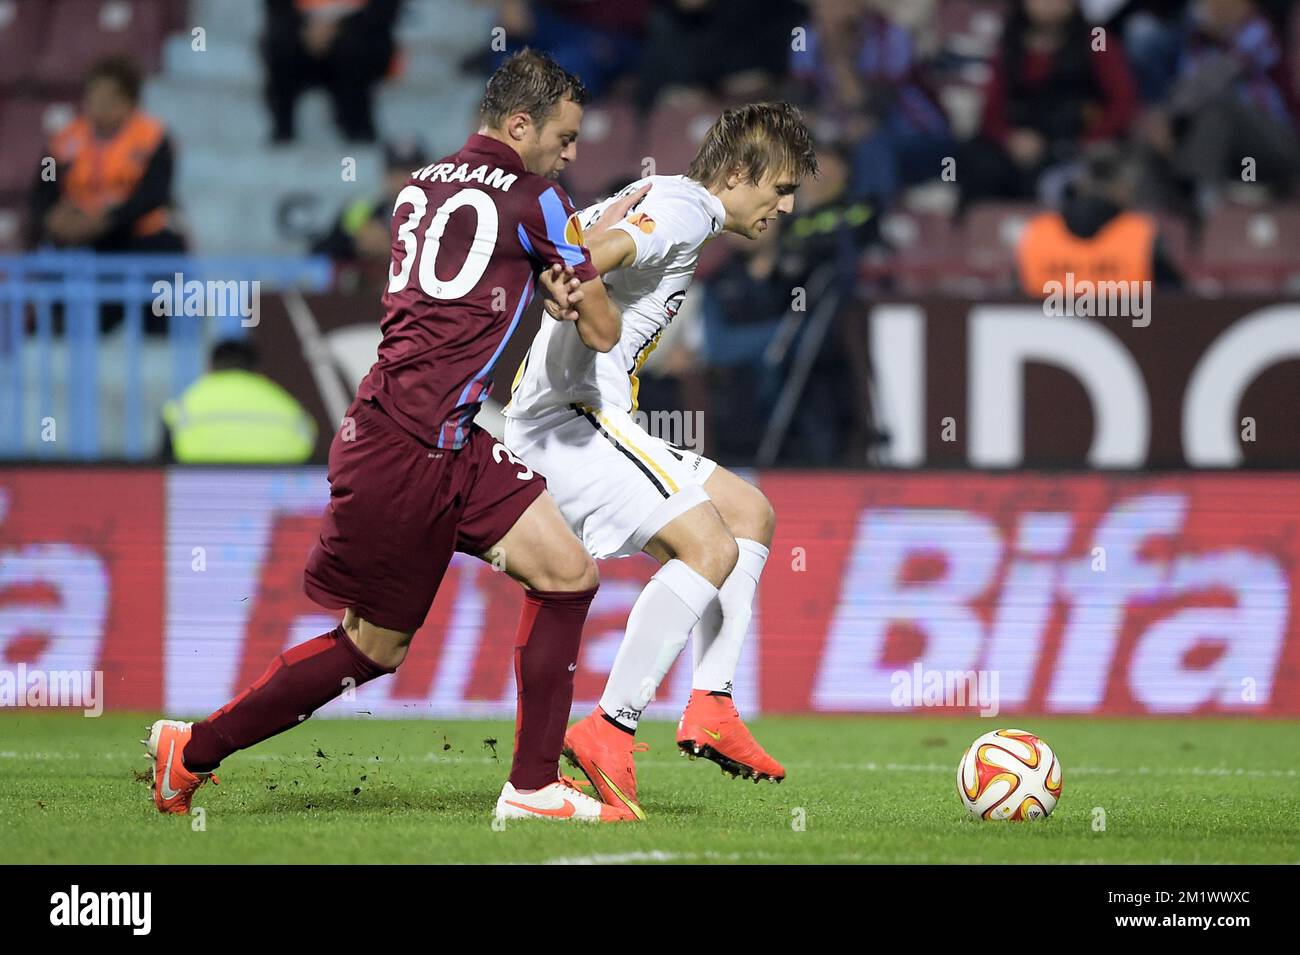 20141023 - TRABZON, TURKEY: Trabzonspor's Avraam Papadopoulos and Lokeren's Besart Abdurahimi fight for the ball during a game between Turkish club Trabzonspor AS and Belgian soccer team KSC Lokeren OVL in the Huseyin Avni Aker Stadium in Trabzon, Thursday 23 October 2014. It is the third day of the group stage of the UEFA Europa League competition, in group L. BELGA PHOTO YORICK JANSENS Stock Photo